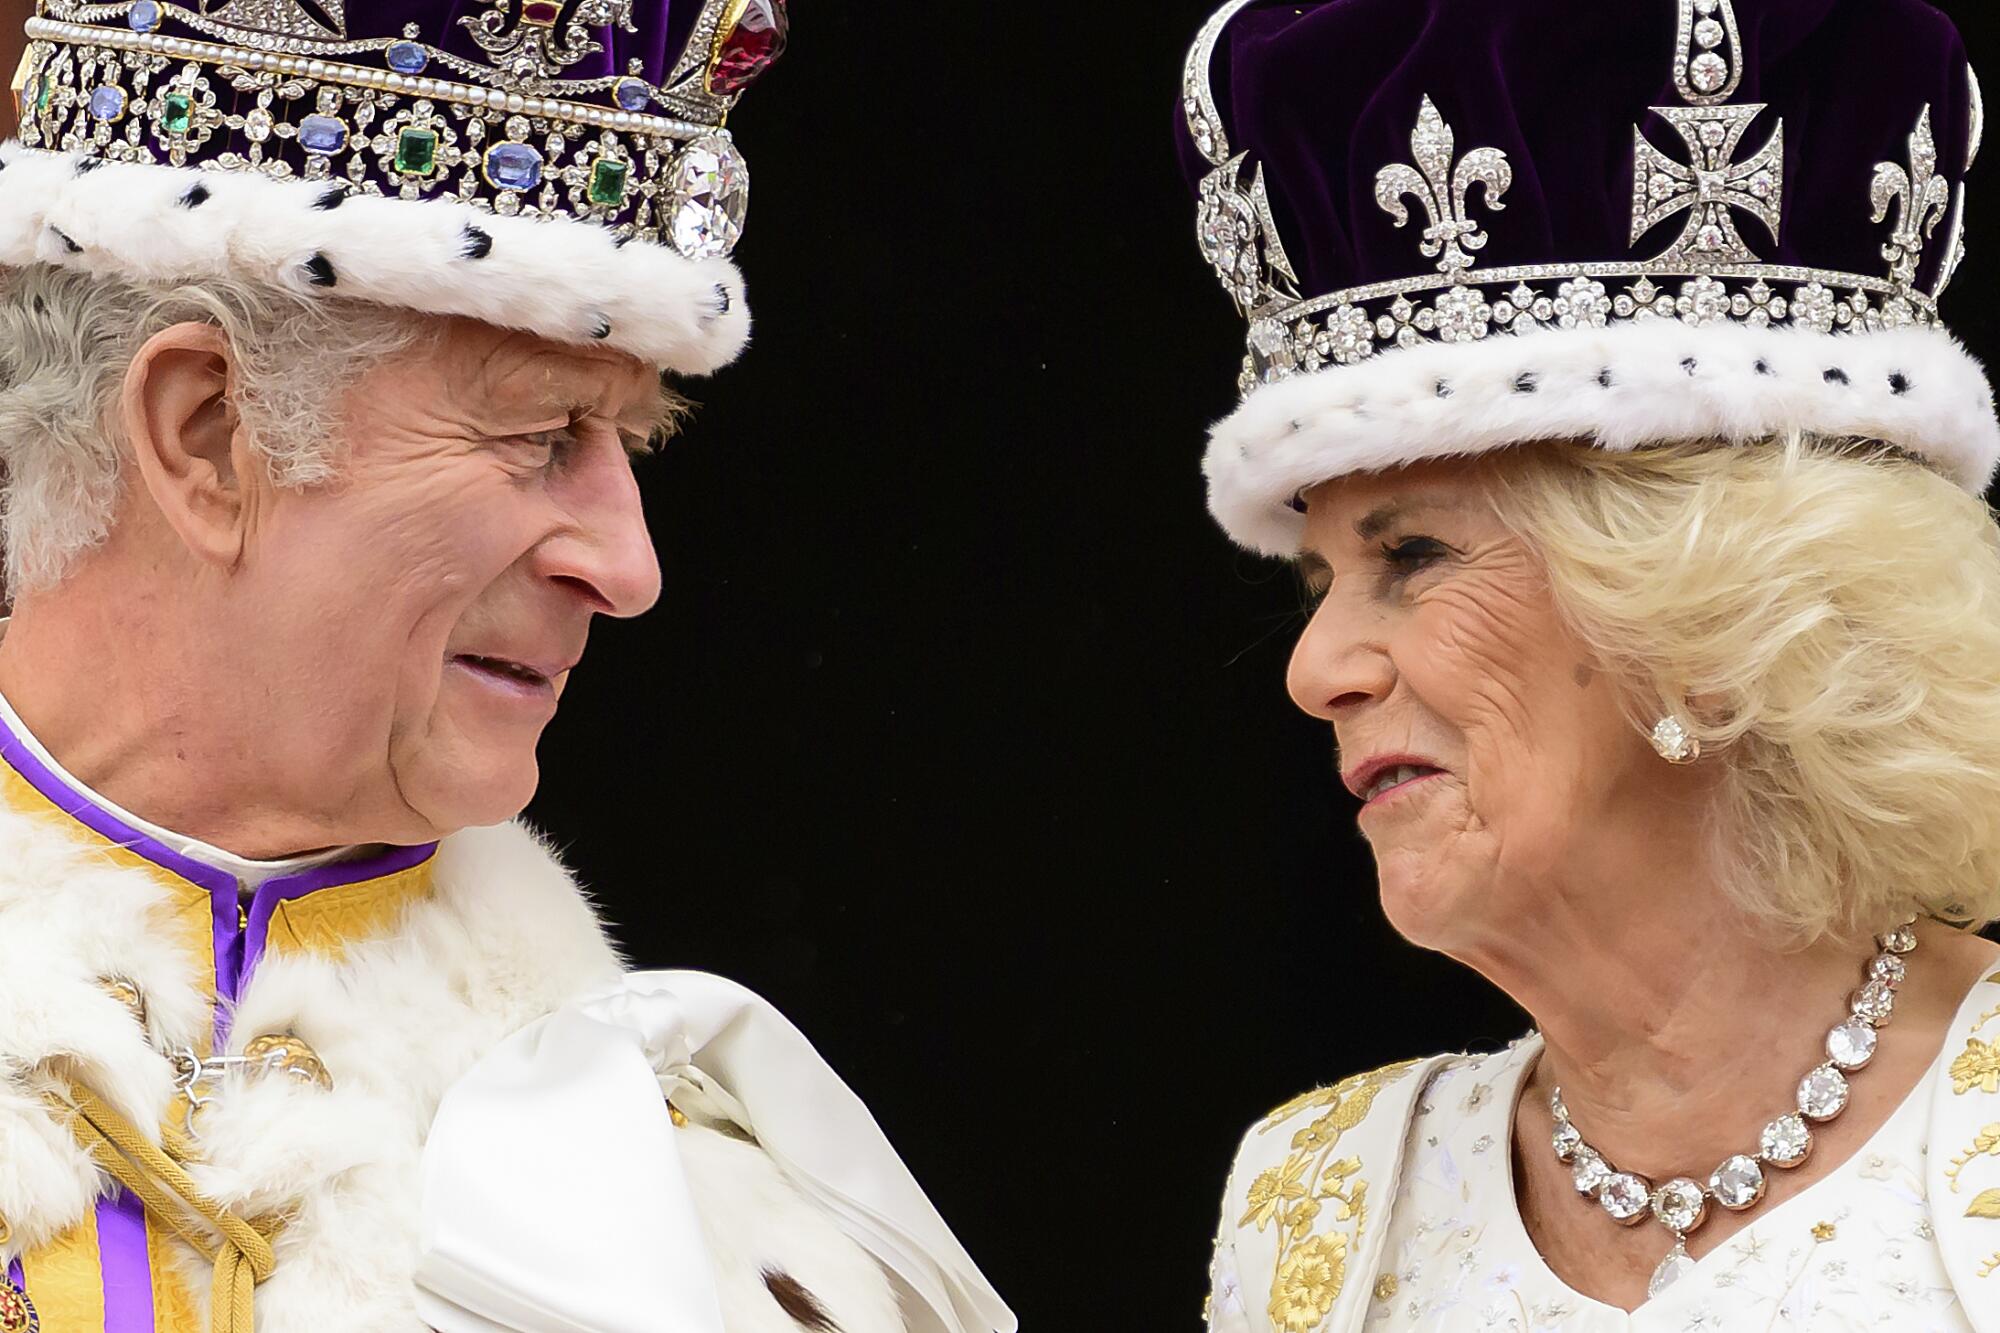 Wearing their coronation crowns, Britain's King Charles III and Queen Camilla look at each other.